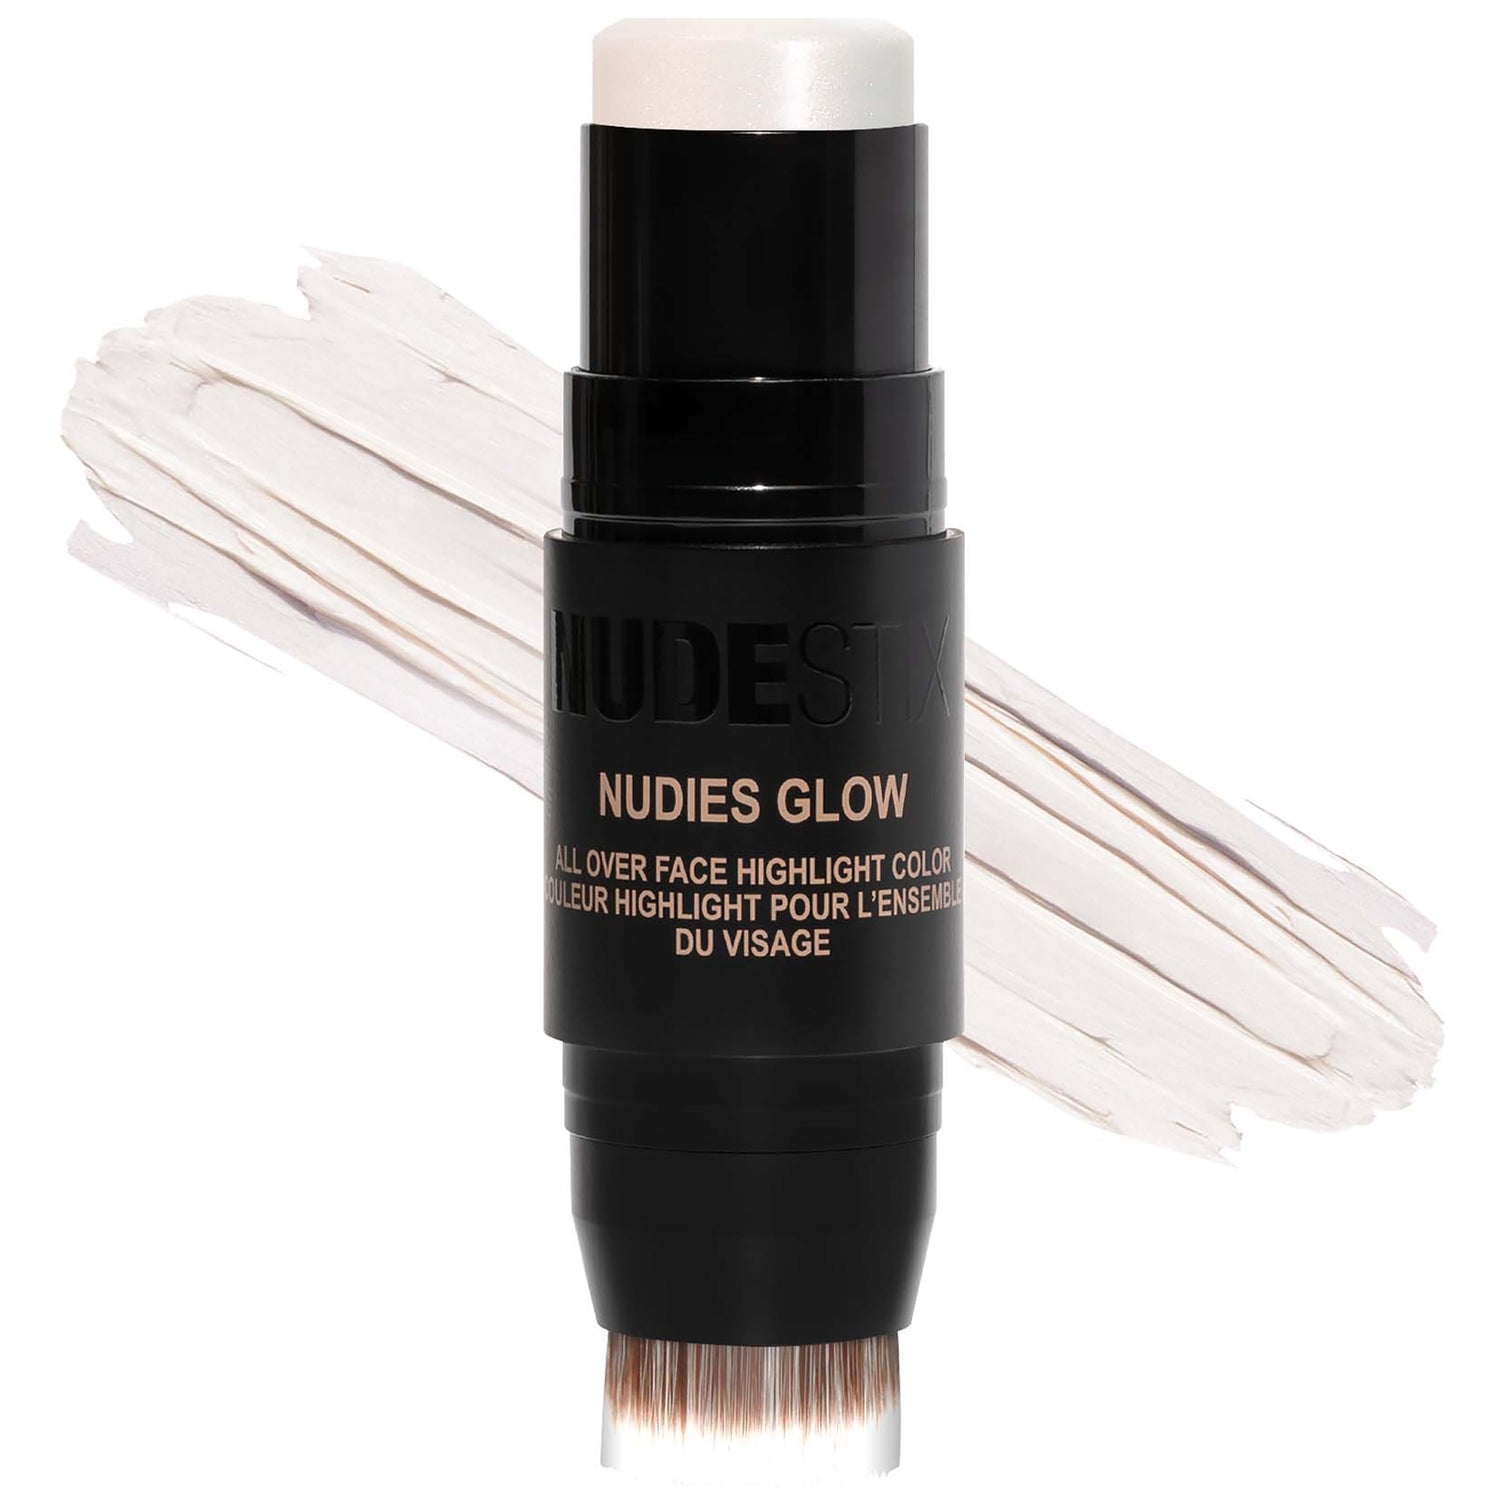 NUDESTIX Nudies Glow All Over Face Highlight Colour 8g (Various Shades)